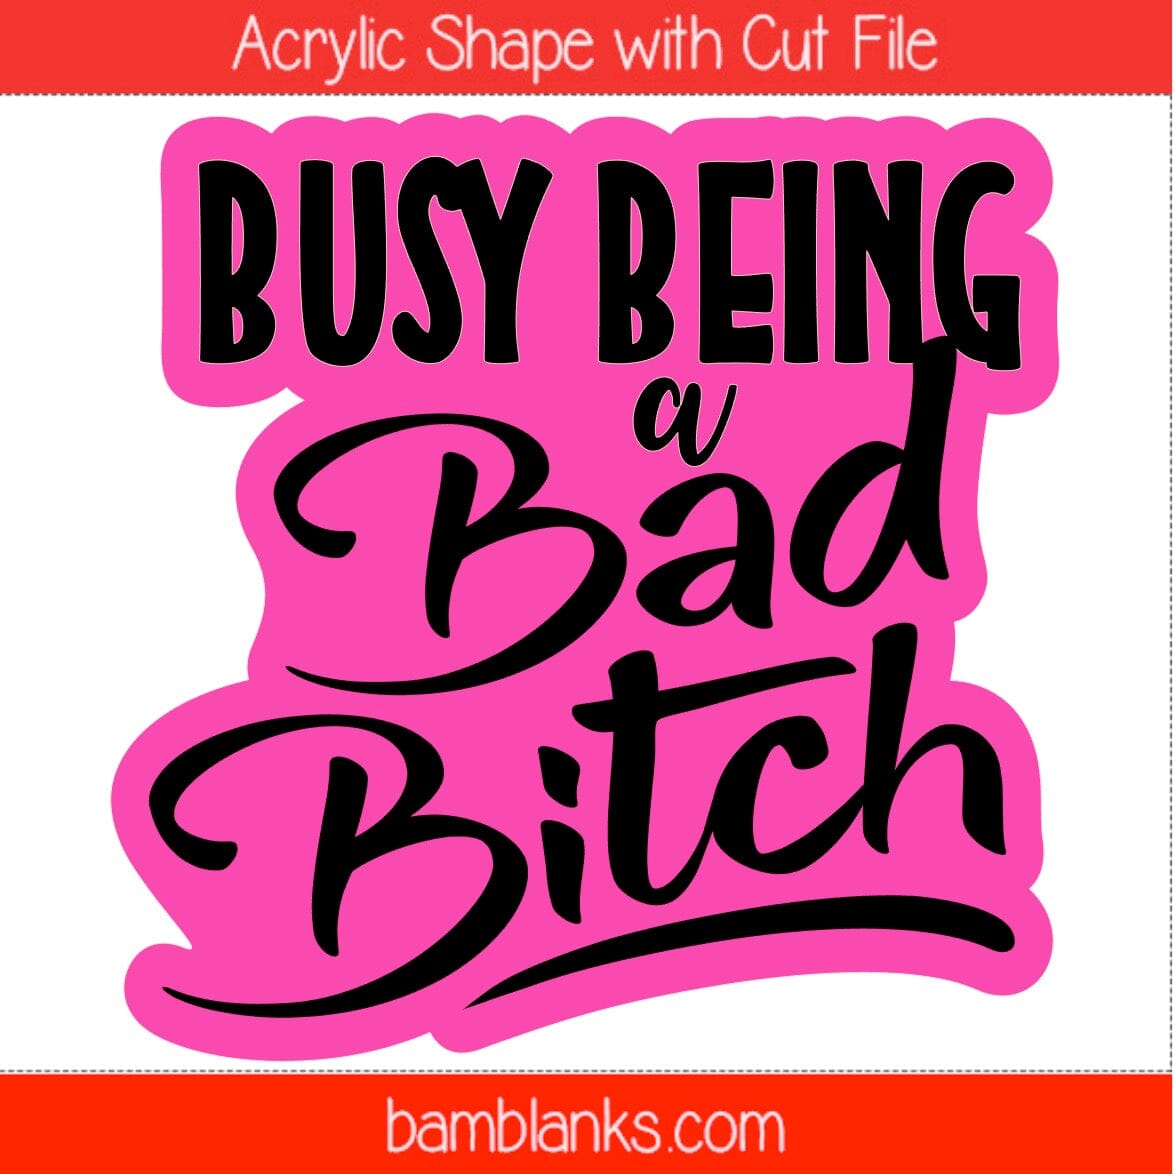 Busy Being A Bad Bitch - Acrylic Shape #1414